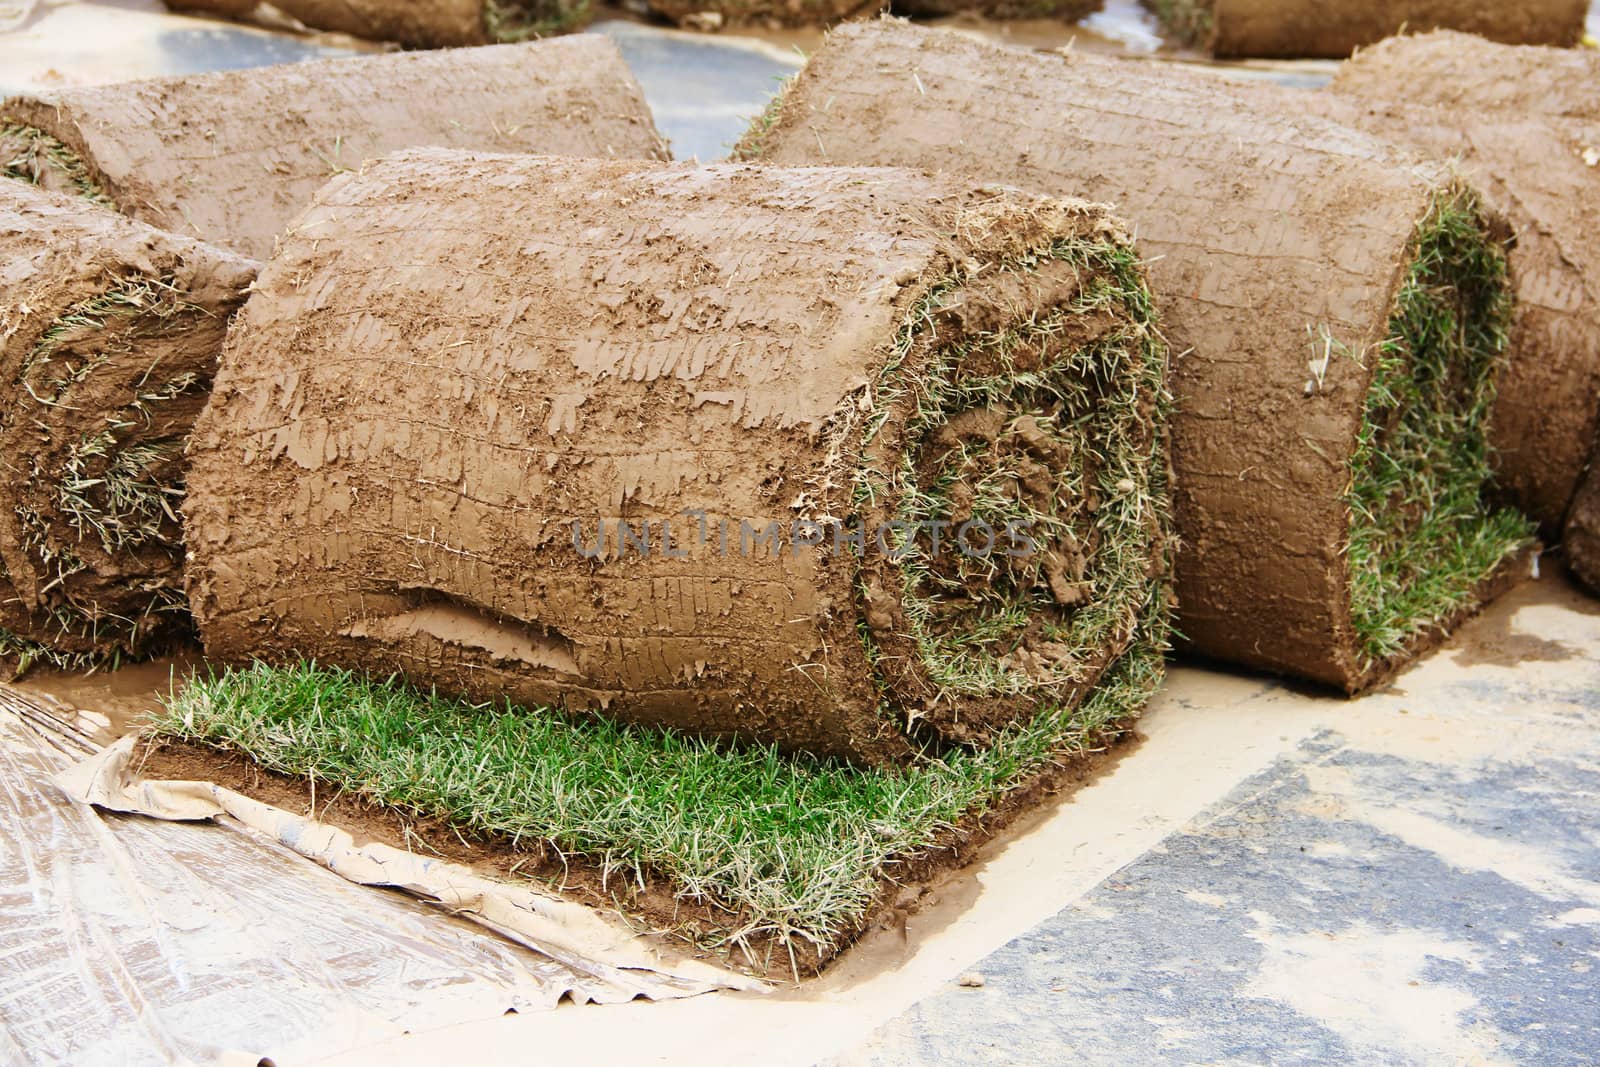 Turf grass rolls partially unrolled close up